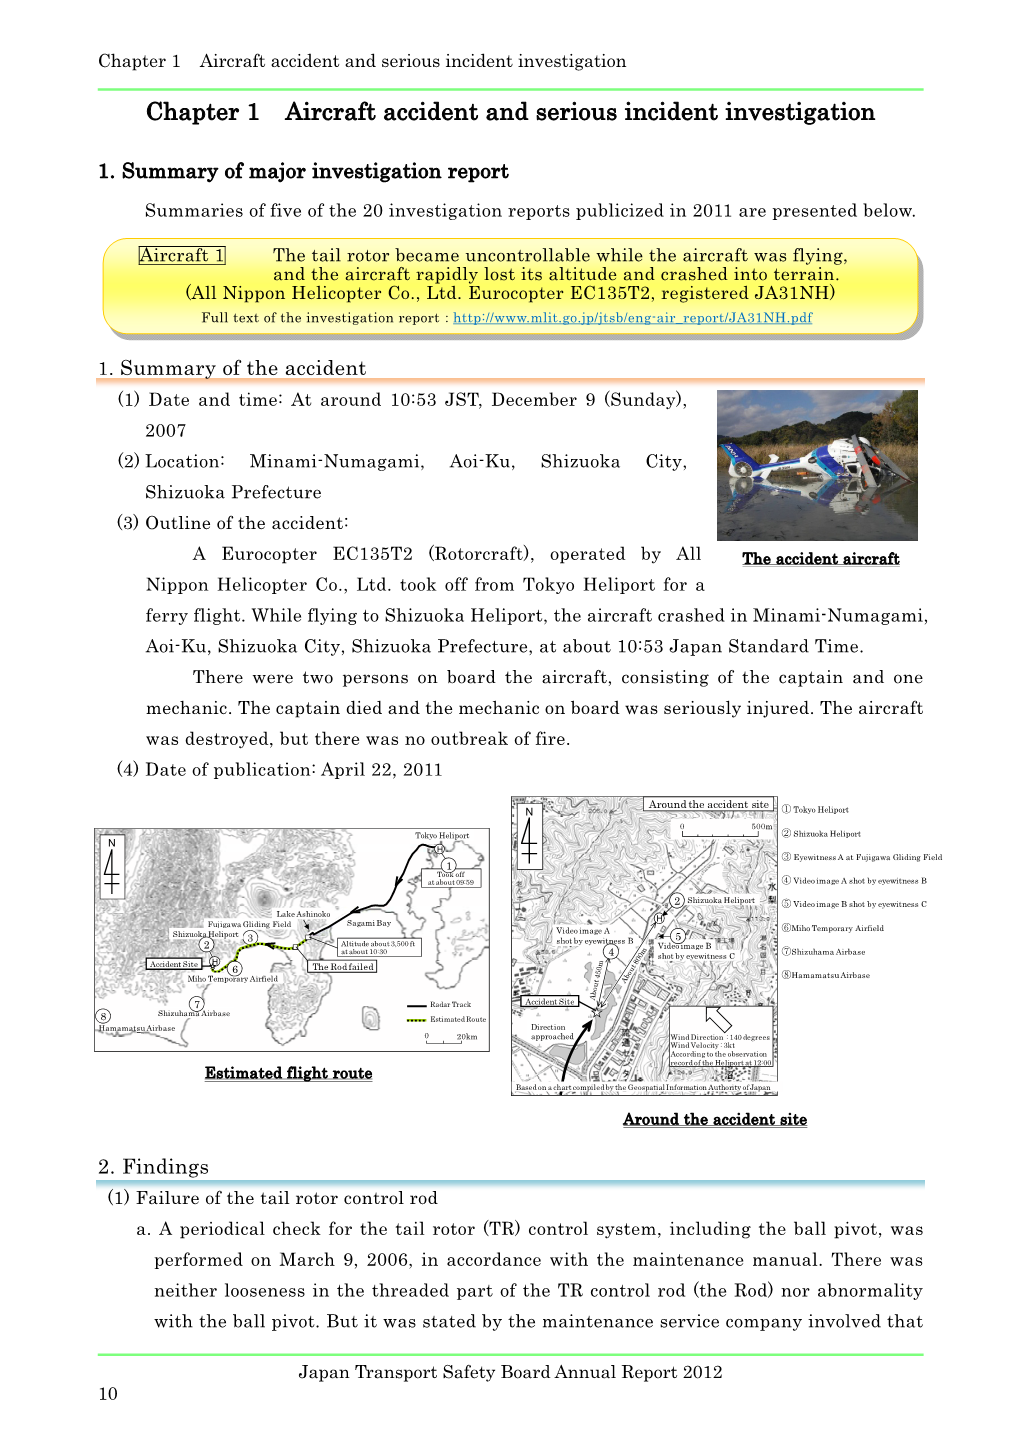 Chapter 1 Aircraft Accident and Serious Incident Investigation